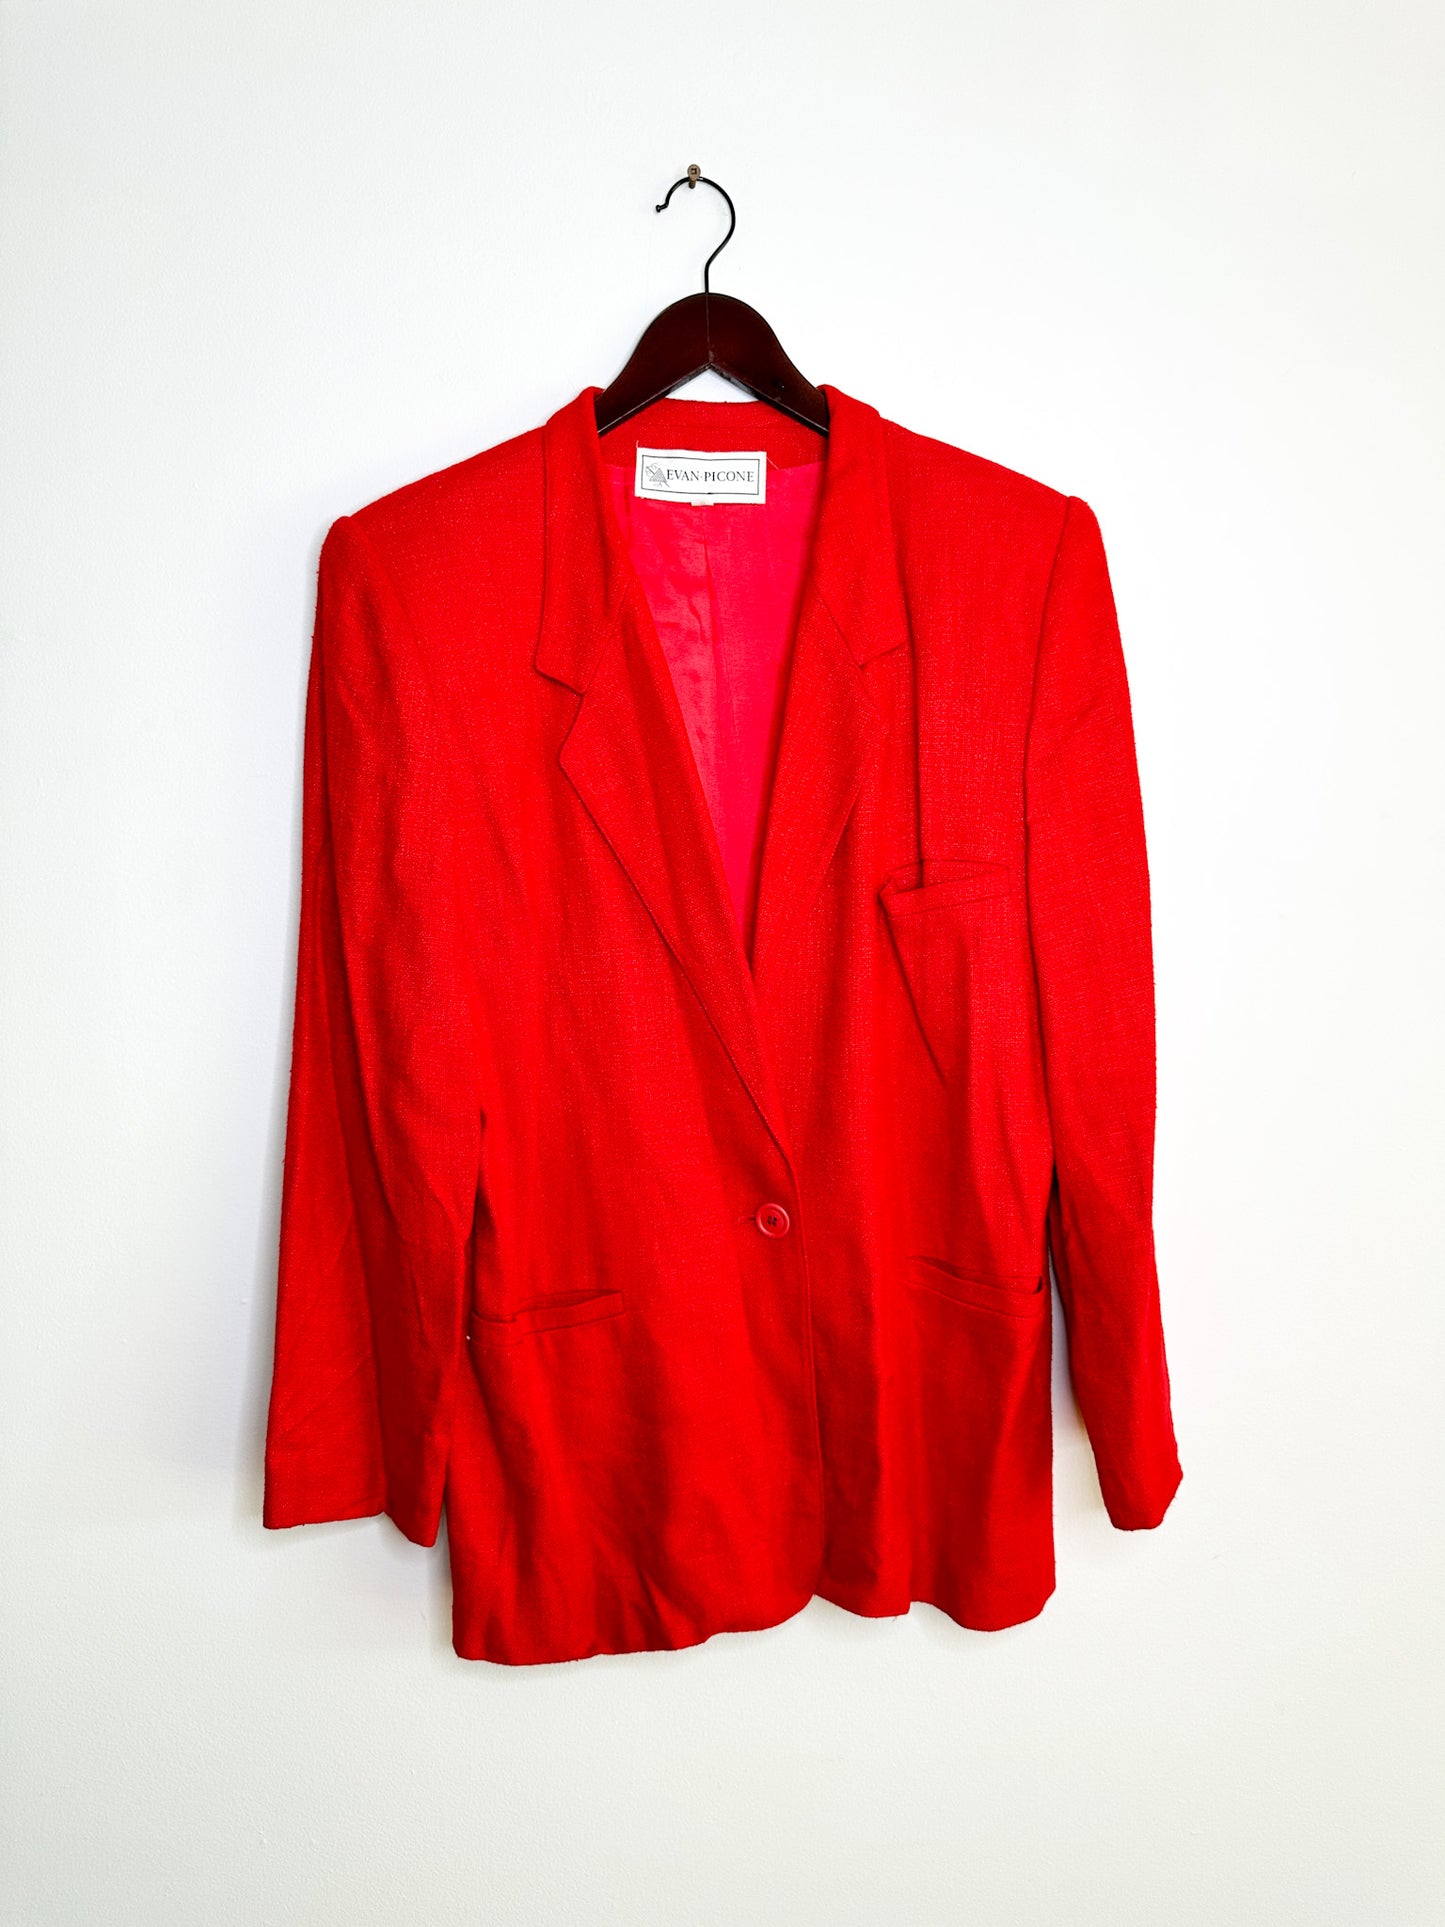 Evan-Picone Couture Red Linen Blend Blazer with Pockets| Red Fall/Winter Blazer | Size: 8 (Medium)